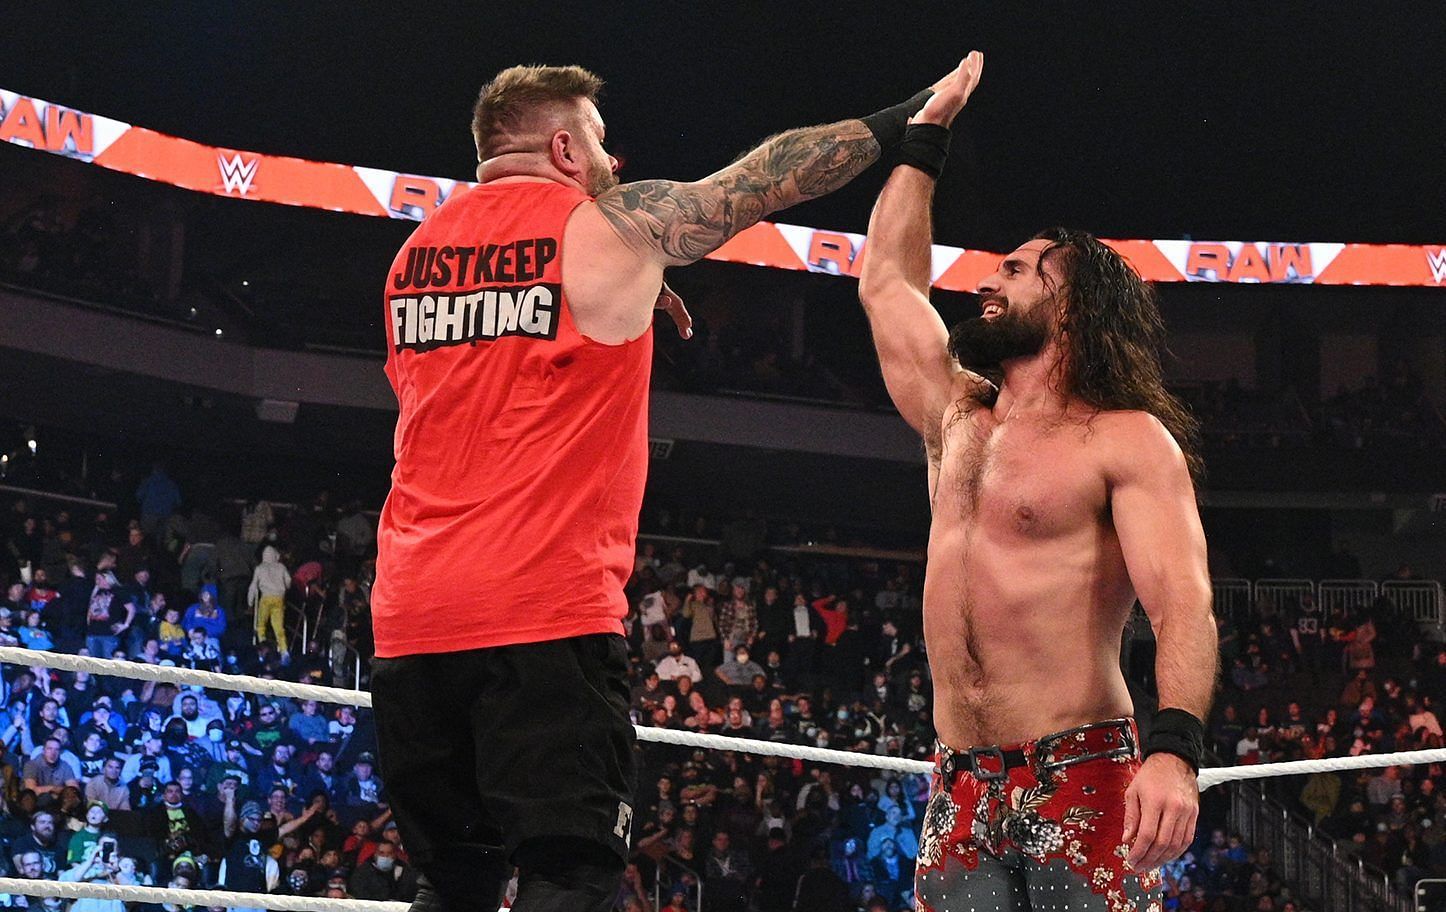 How far can Rollins and Owens take their current partnership?